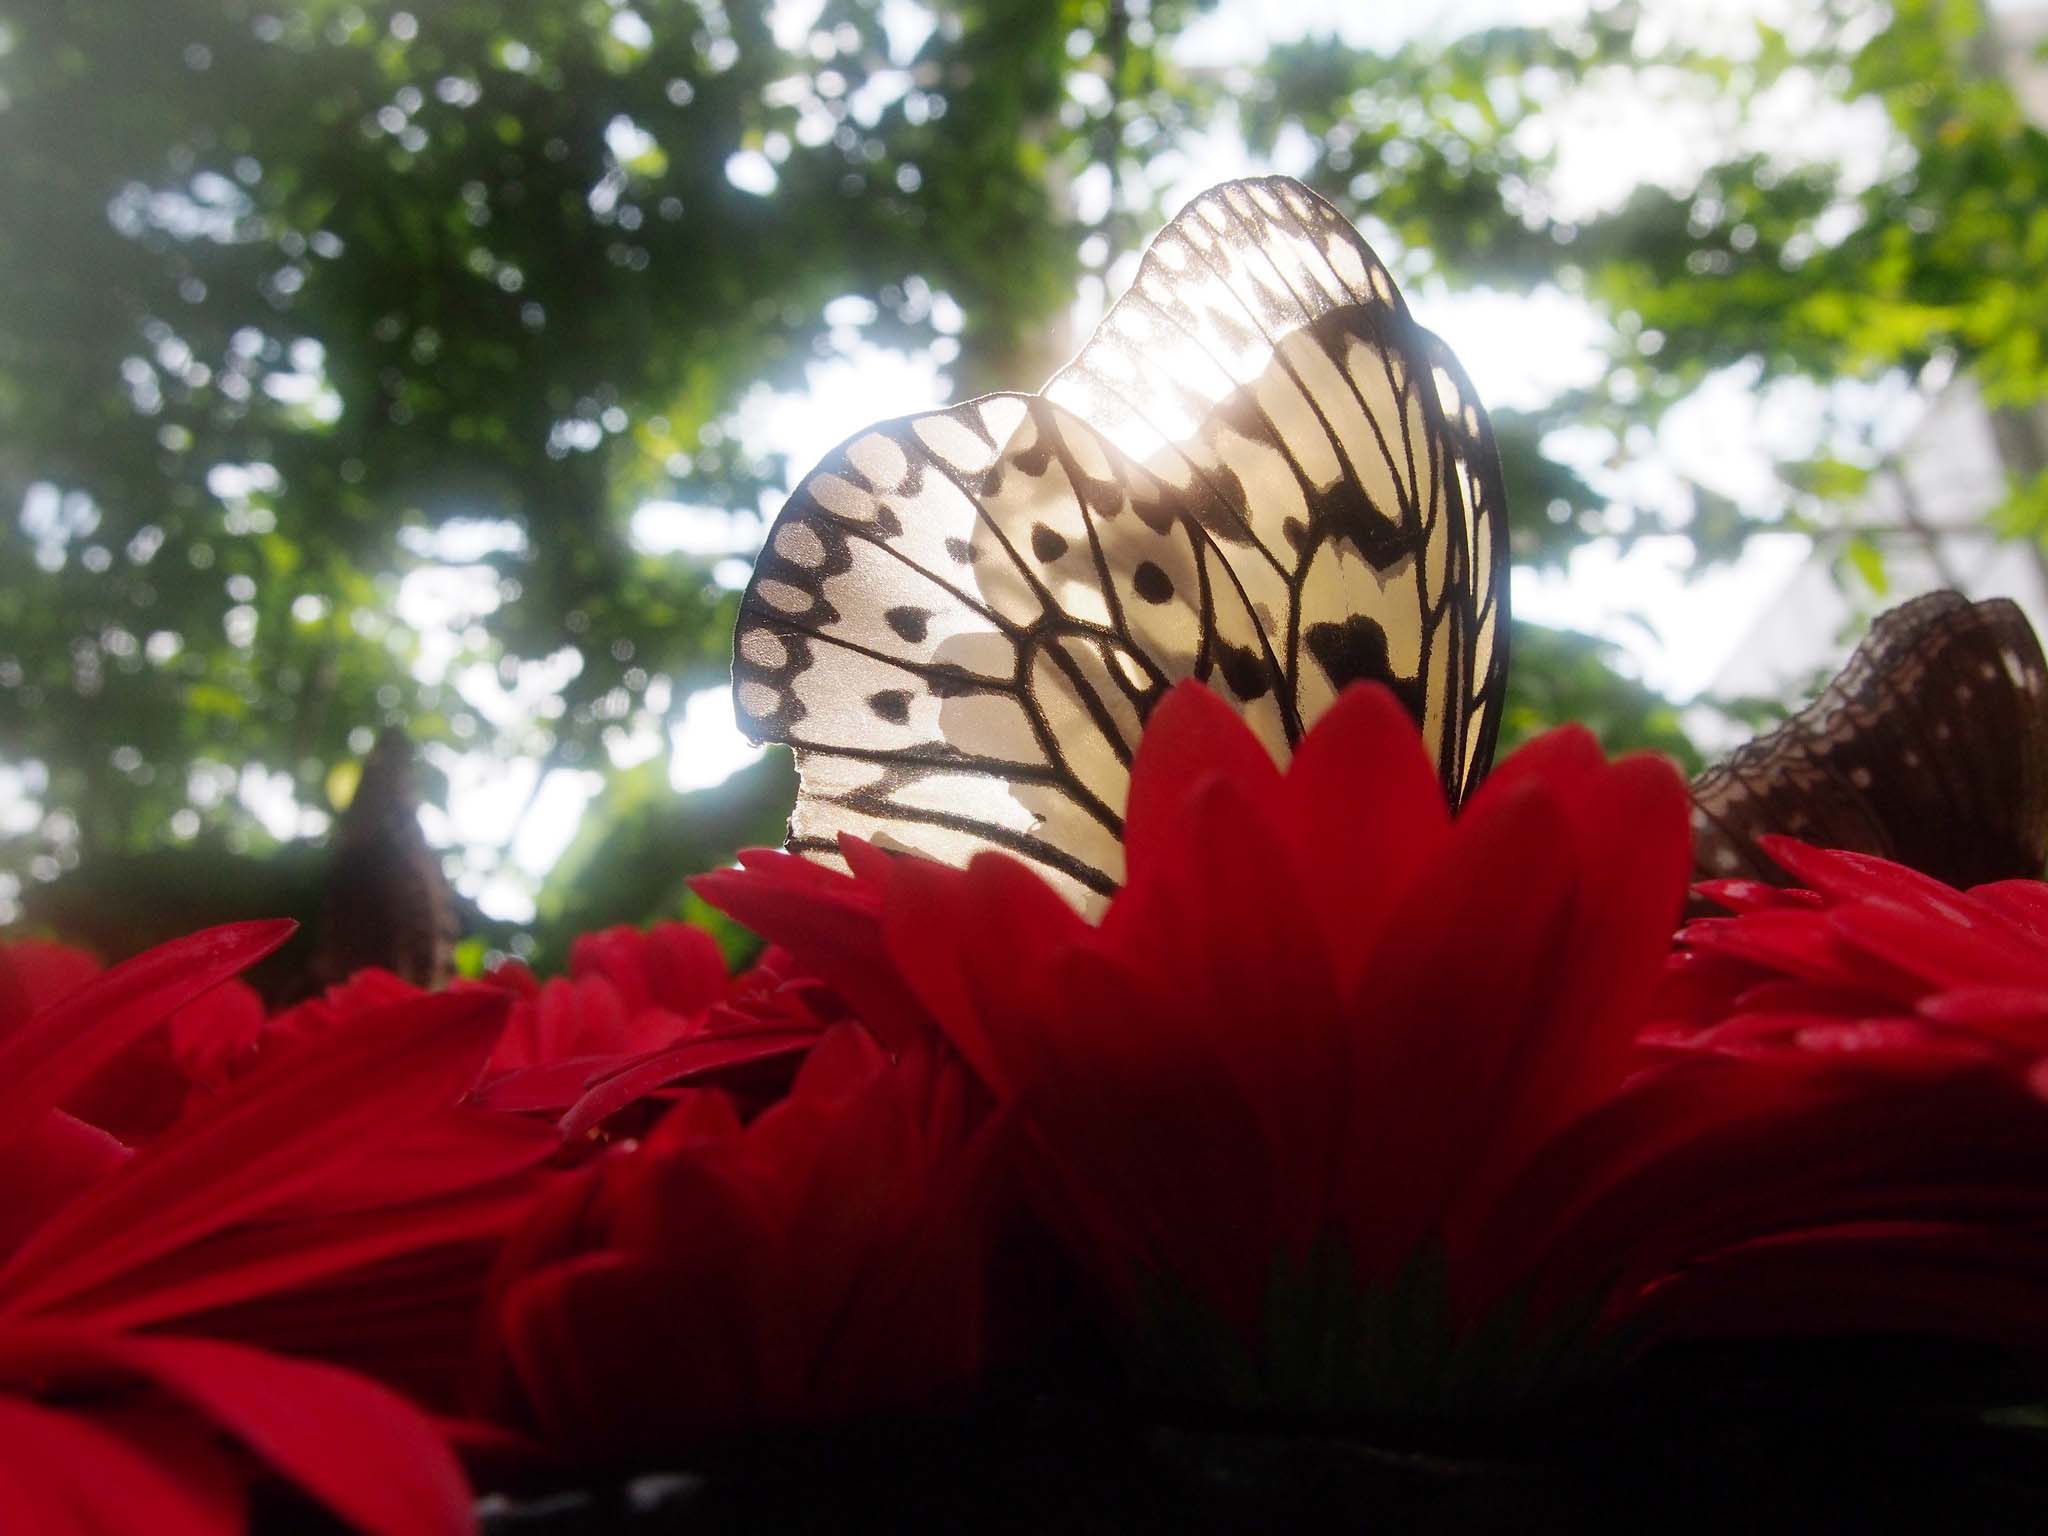 The Butterfly Garden at Singapore's Changi Airport